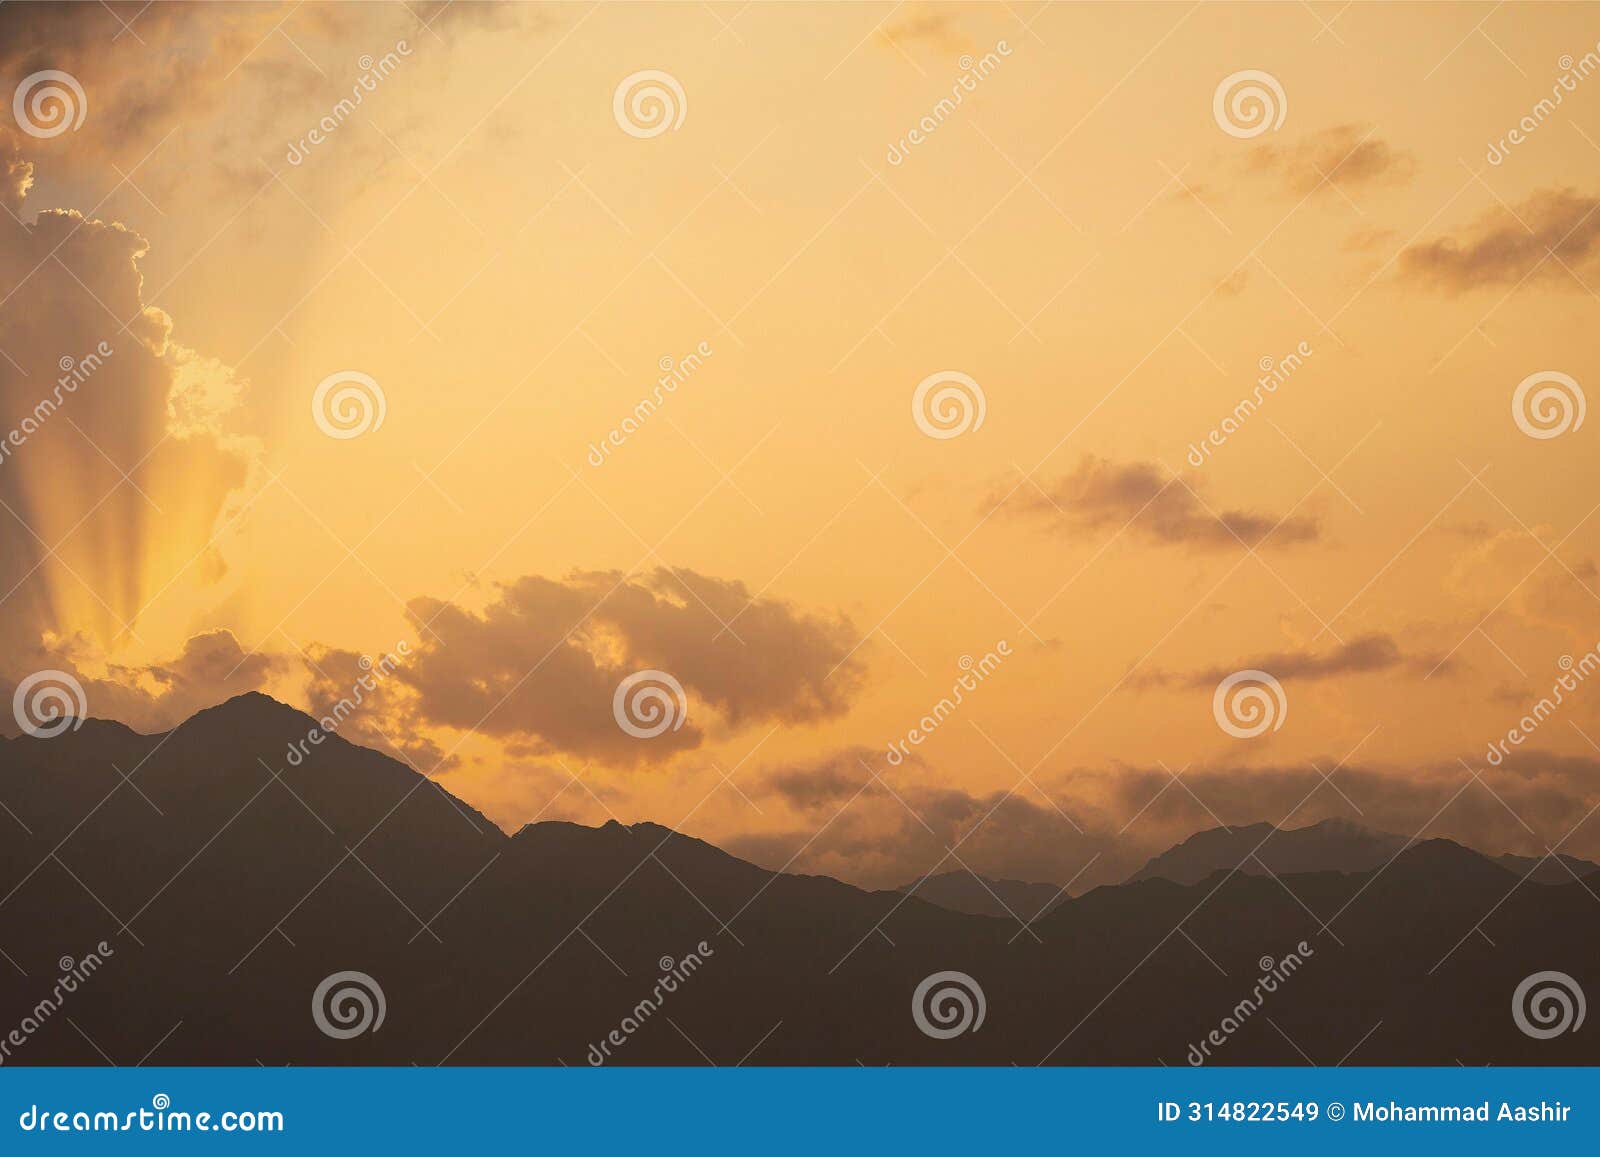 sunset at the northern spanish region of leon's riaÃ±o peak, surrounded by snow-capped mountains and forests.